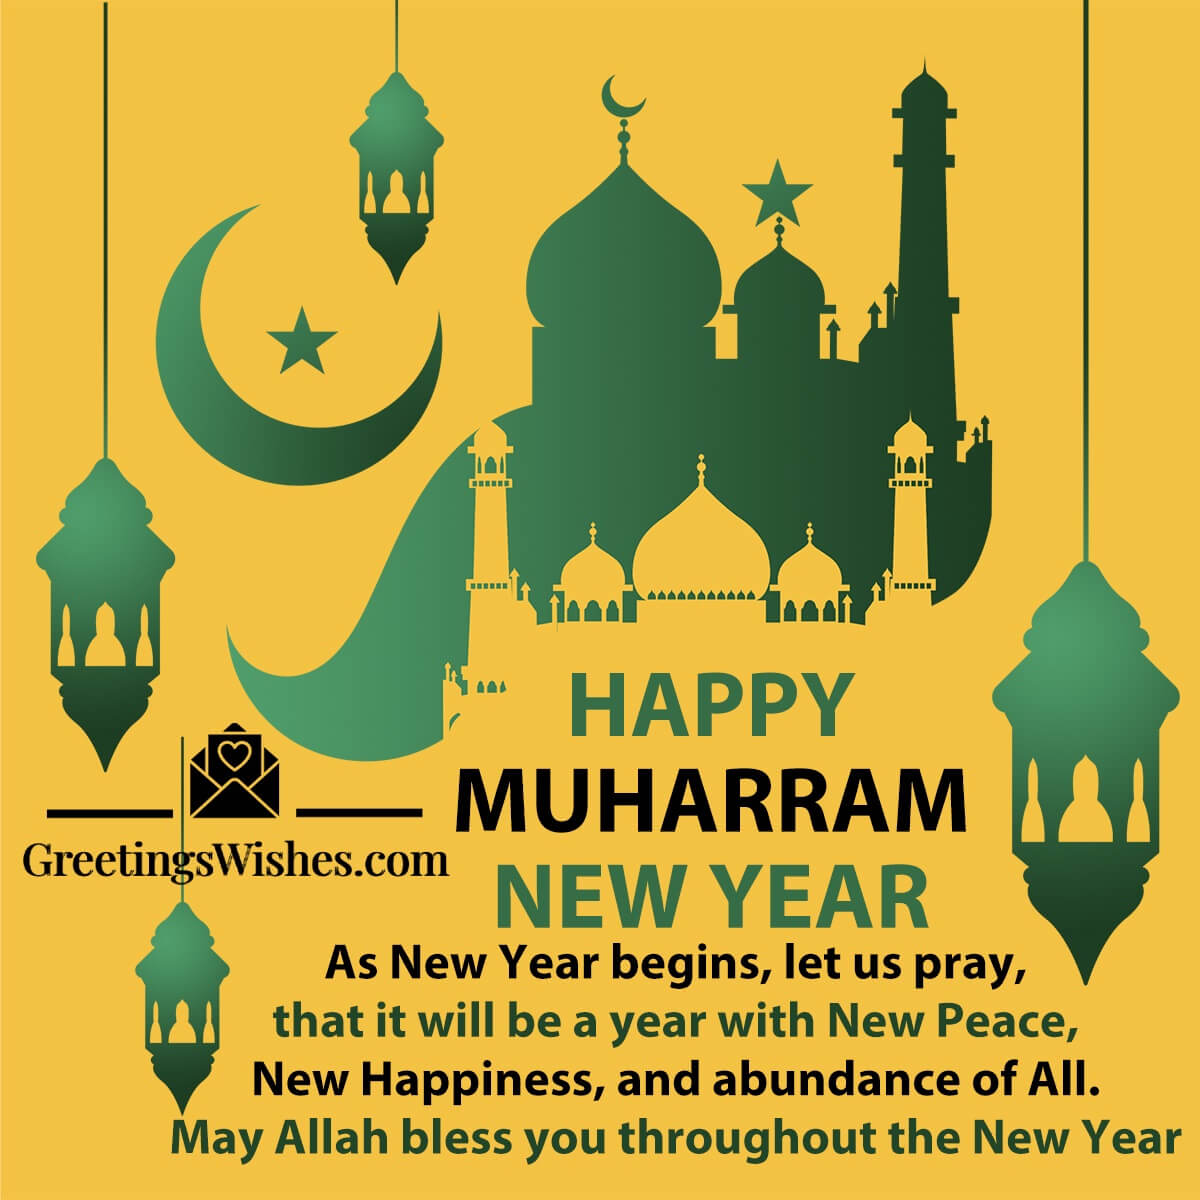 Islamic New Year Wishes - Greetings Wishes